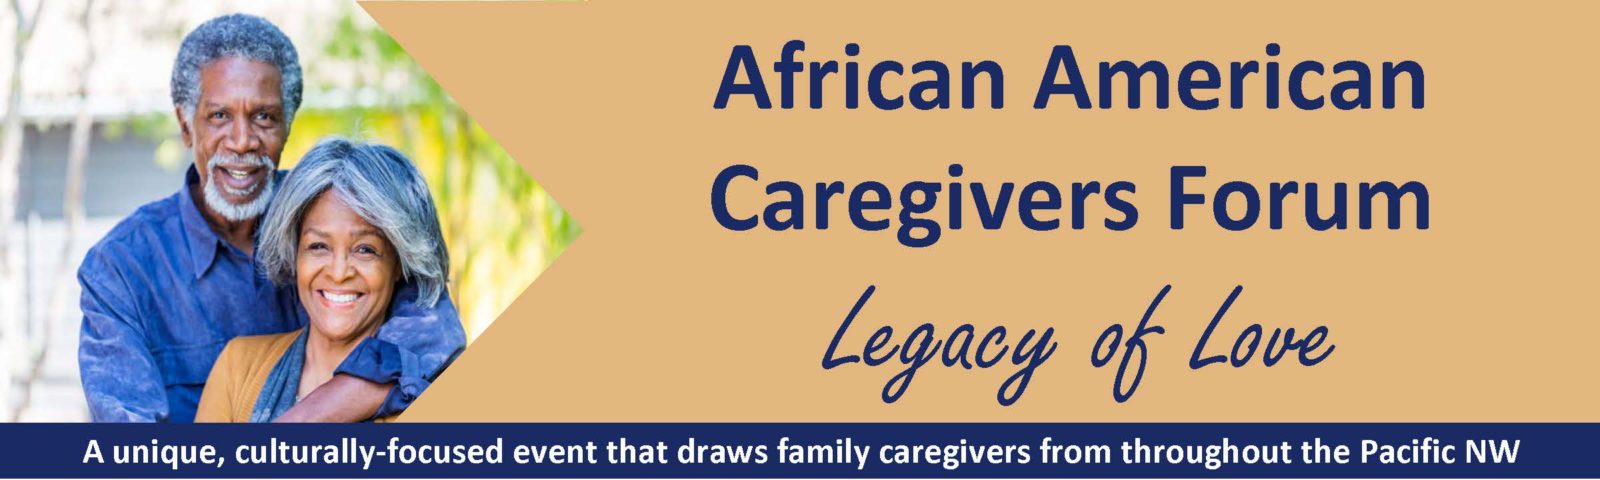 banner for the African American Caregivers Forum - Legacy of Love